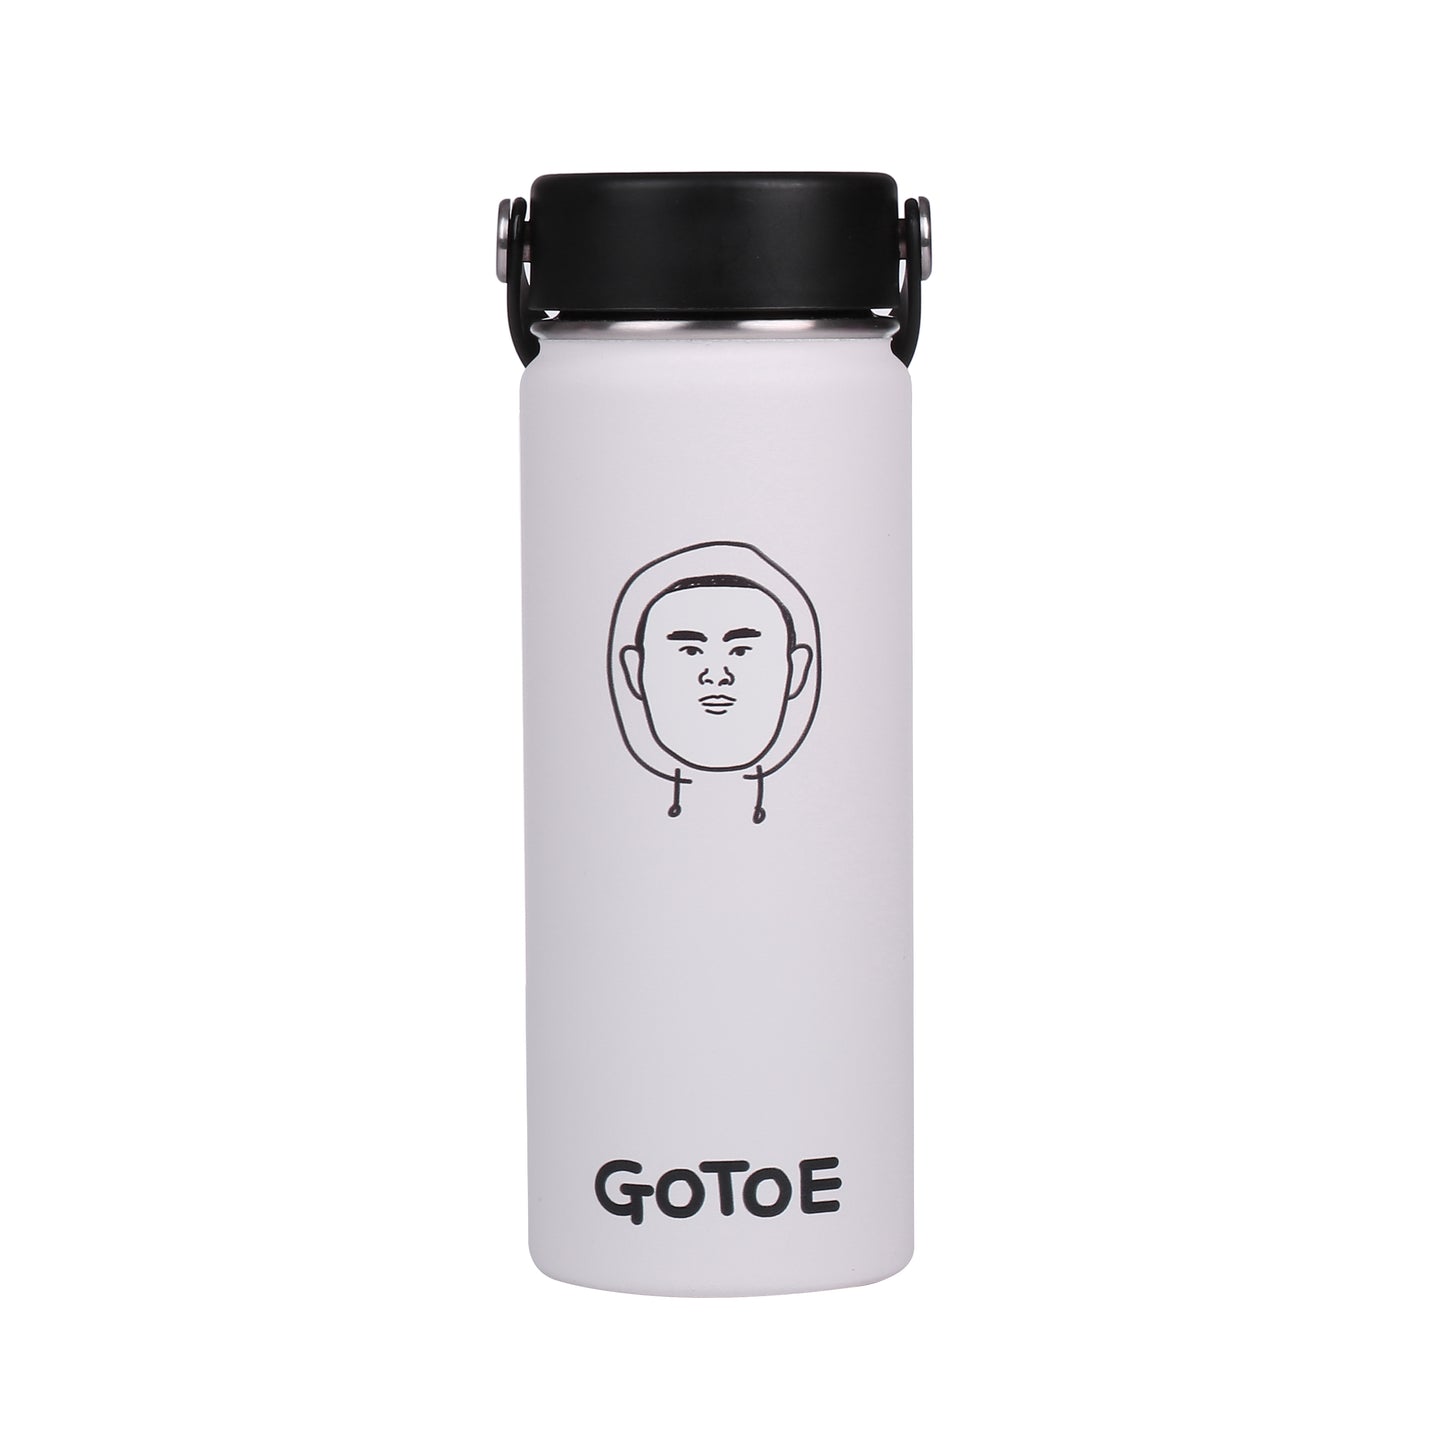 LIMITED EDITION GOTOE Water Bottle